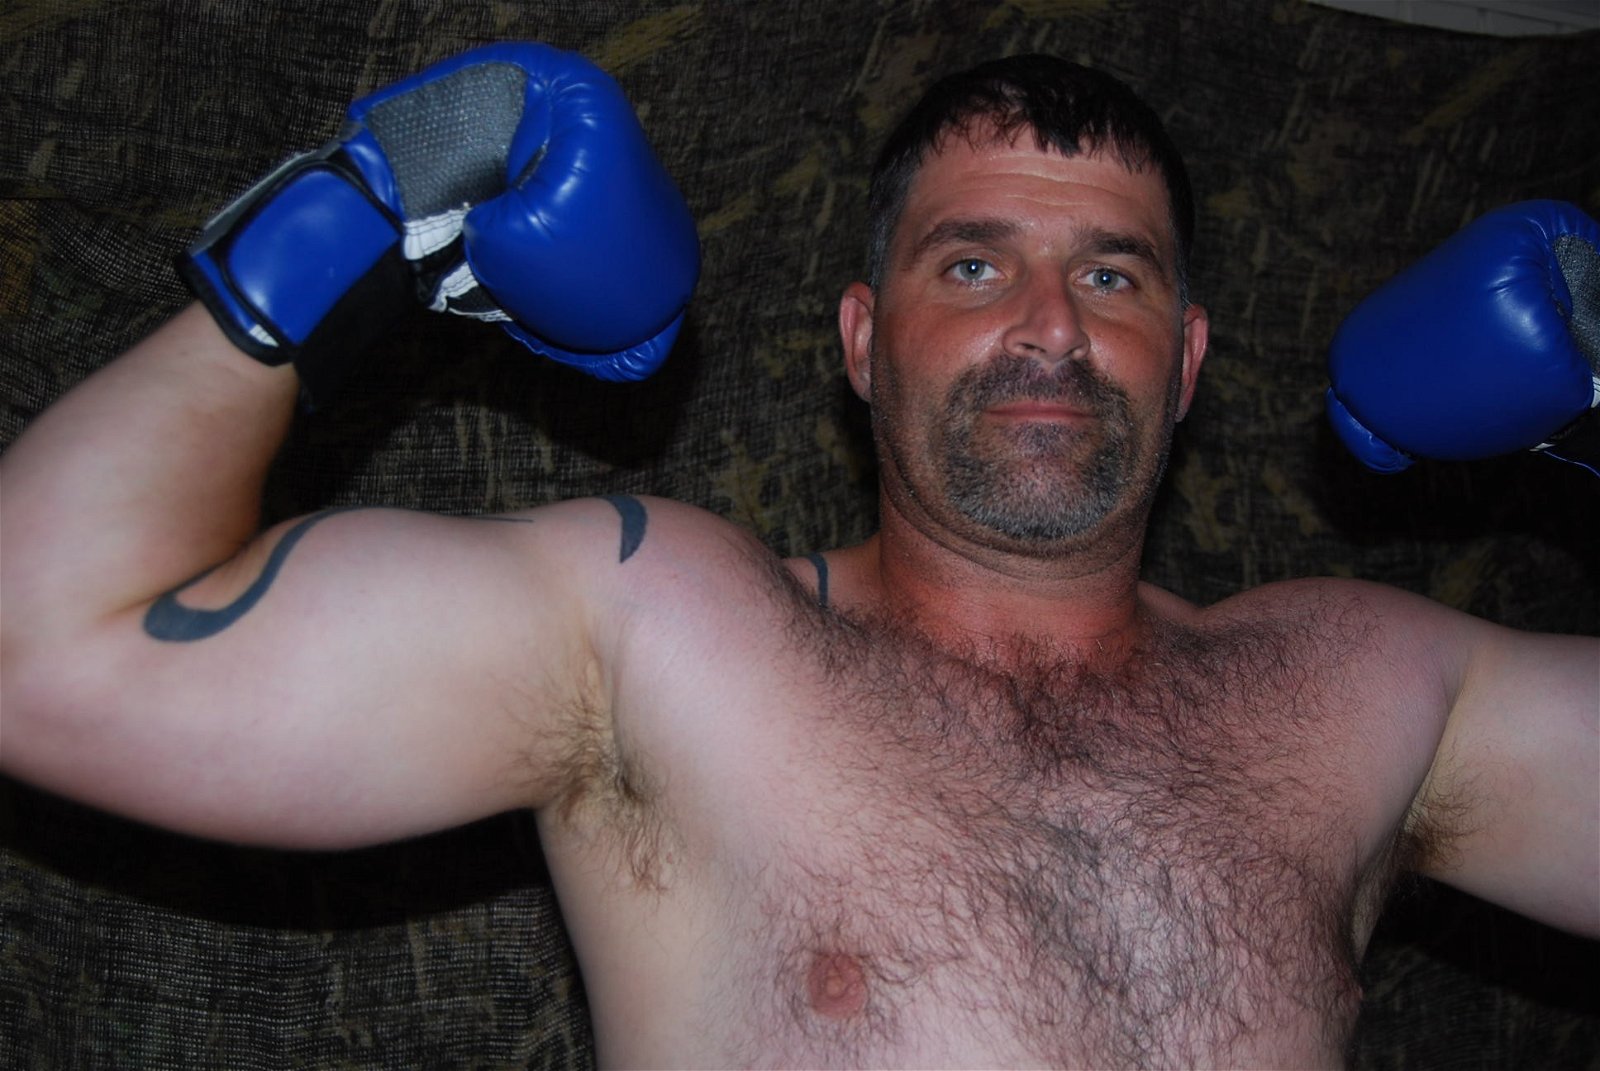 Watch the Photo by Hairy Musclebears with the username @hairymusclebears, posted on September 24, 2019 and the text says 'Boxing Goatee Musclebear Man from USAFUR.com galleries #GayDaddy #Instagay #GayChub #GayCub #hairybelly #BearPhotoADay #gaychubby #bearweek365 #bearsofinstagram #moobs #humanpuppy #humanpupplay #gaypupplay #gayexercisepup #gaymuscle #puppypride #gaykink..'